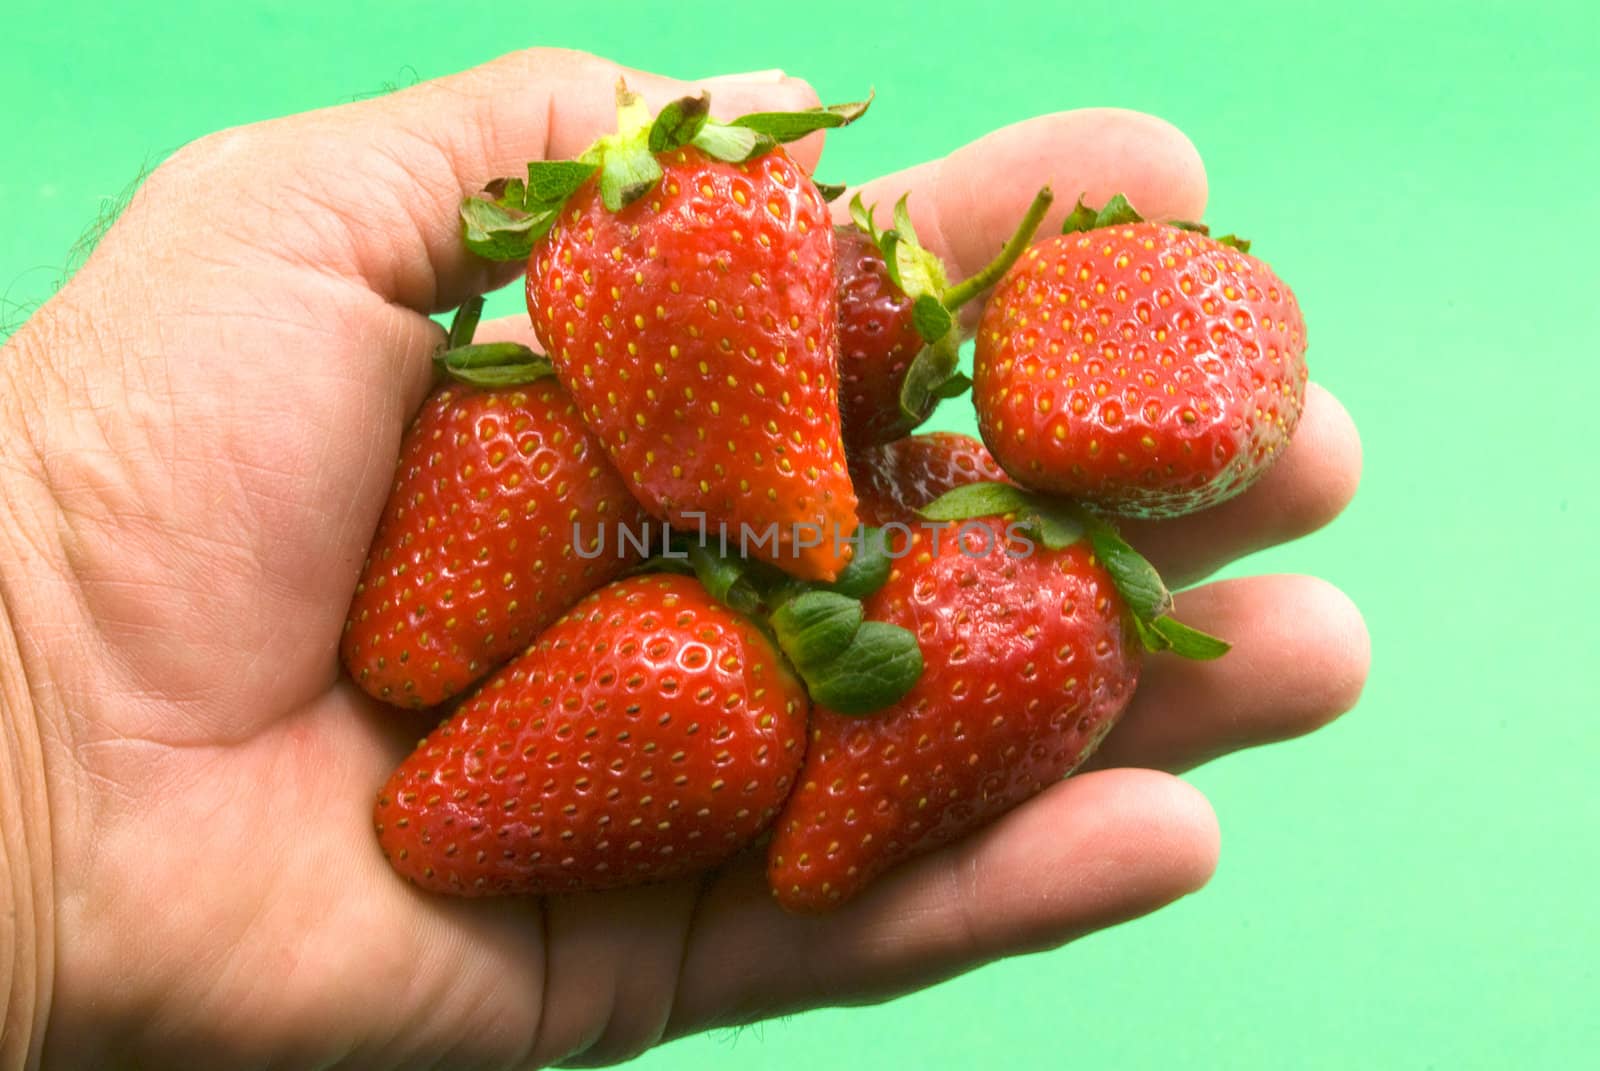 
in his hand, fresh strawberries, collected from the beds, on a green background 